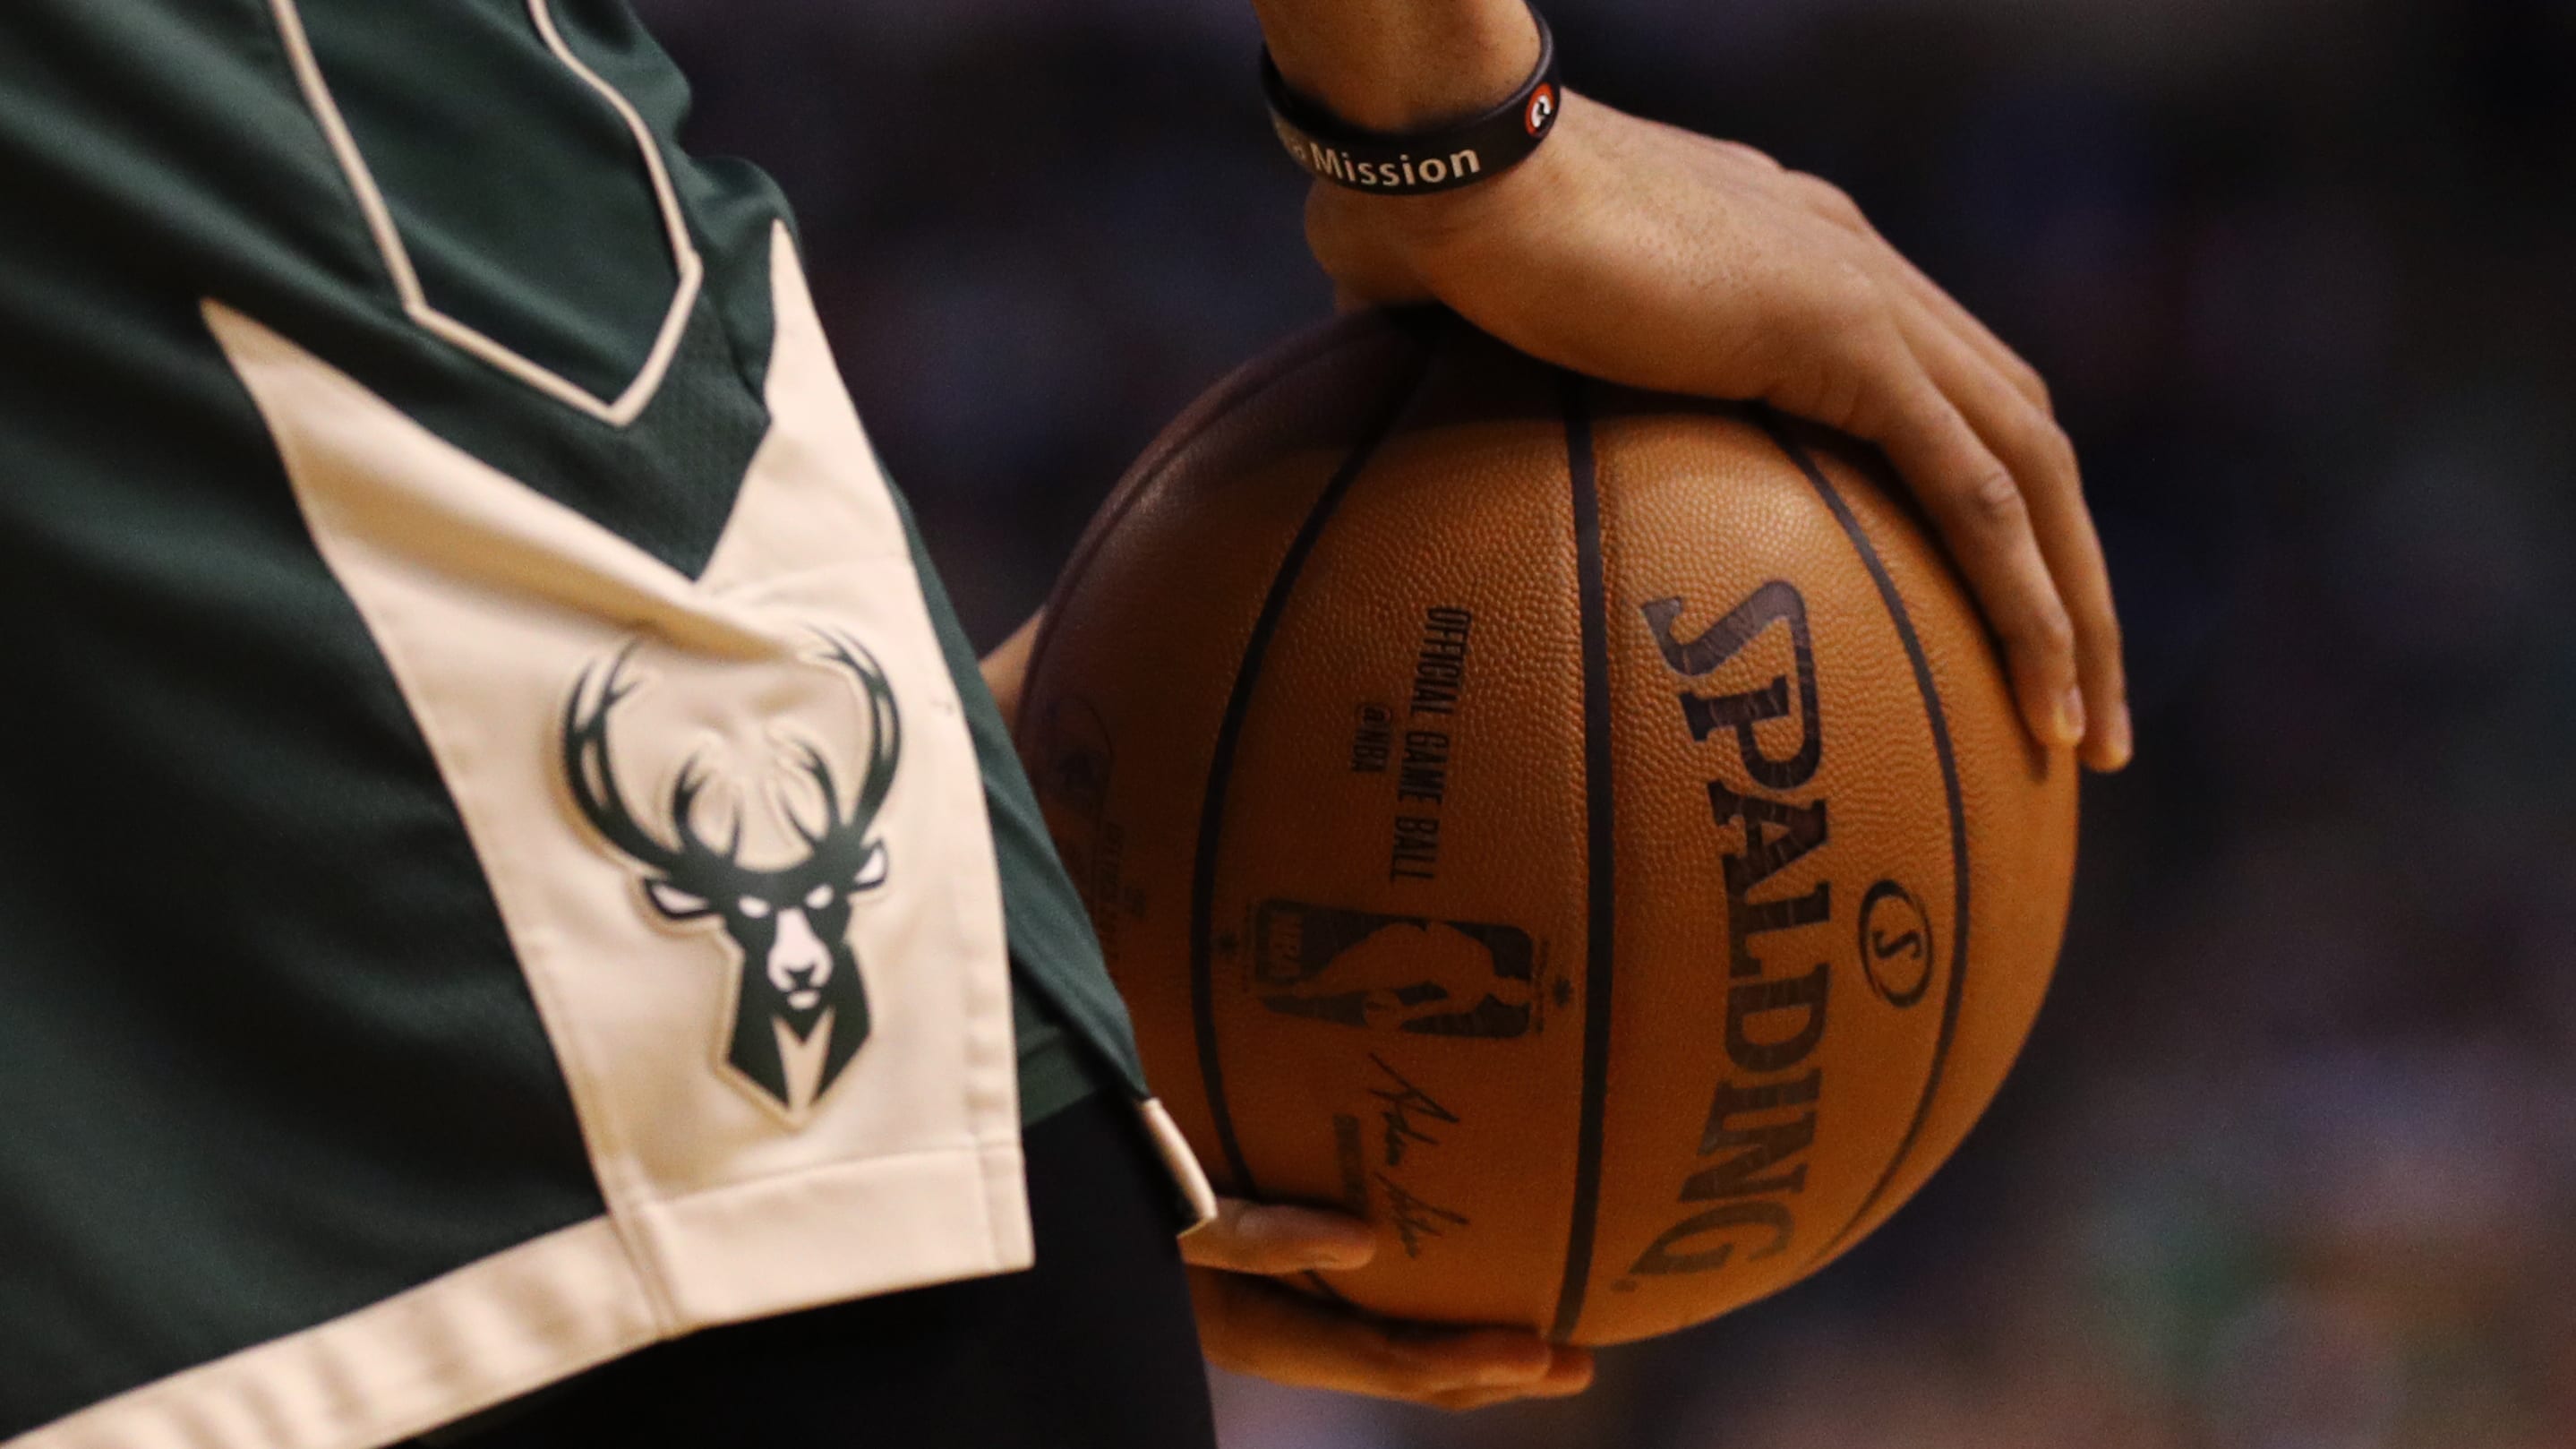 Over/Under: How Big Are Giannis Antetokounmpo's Hands? 